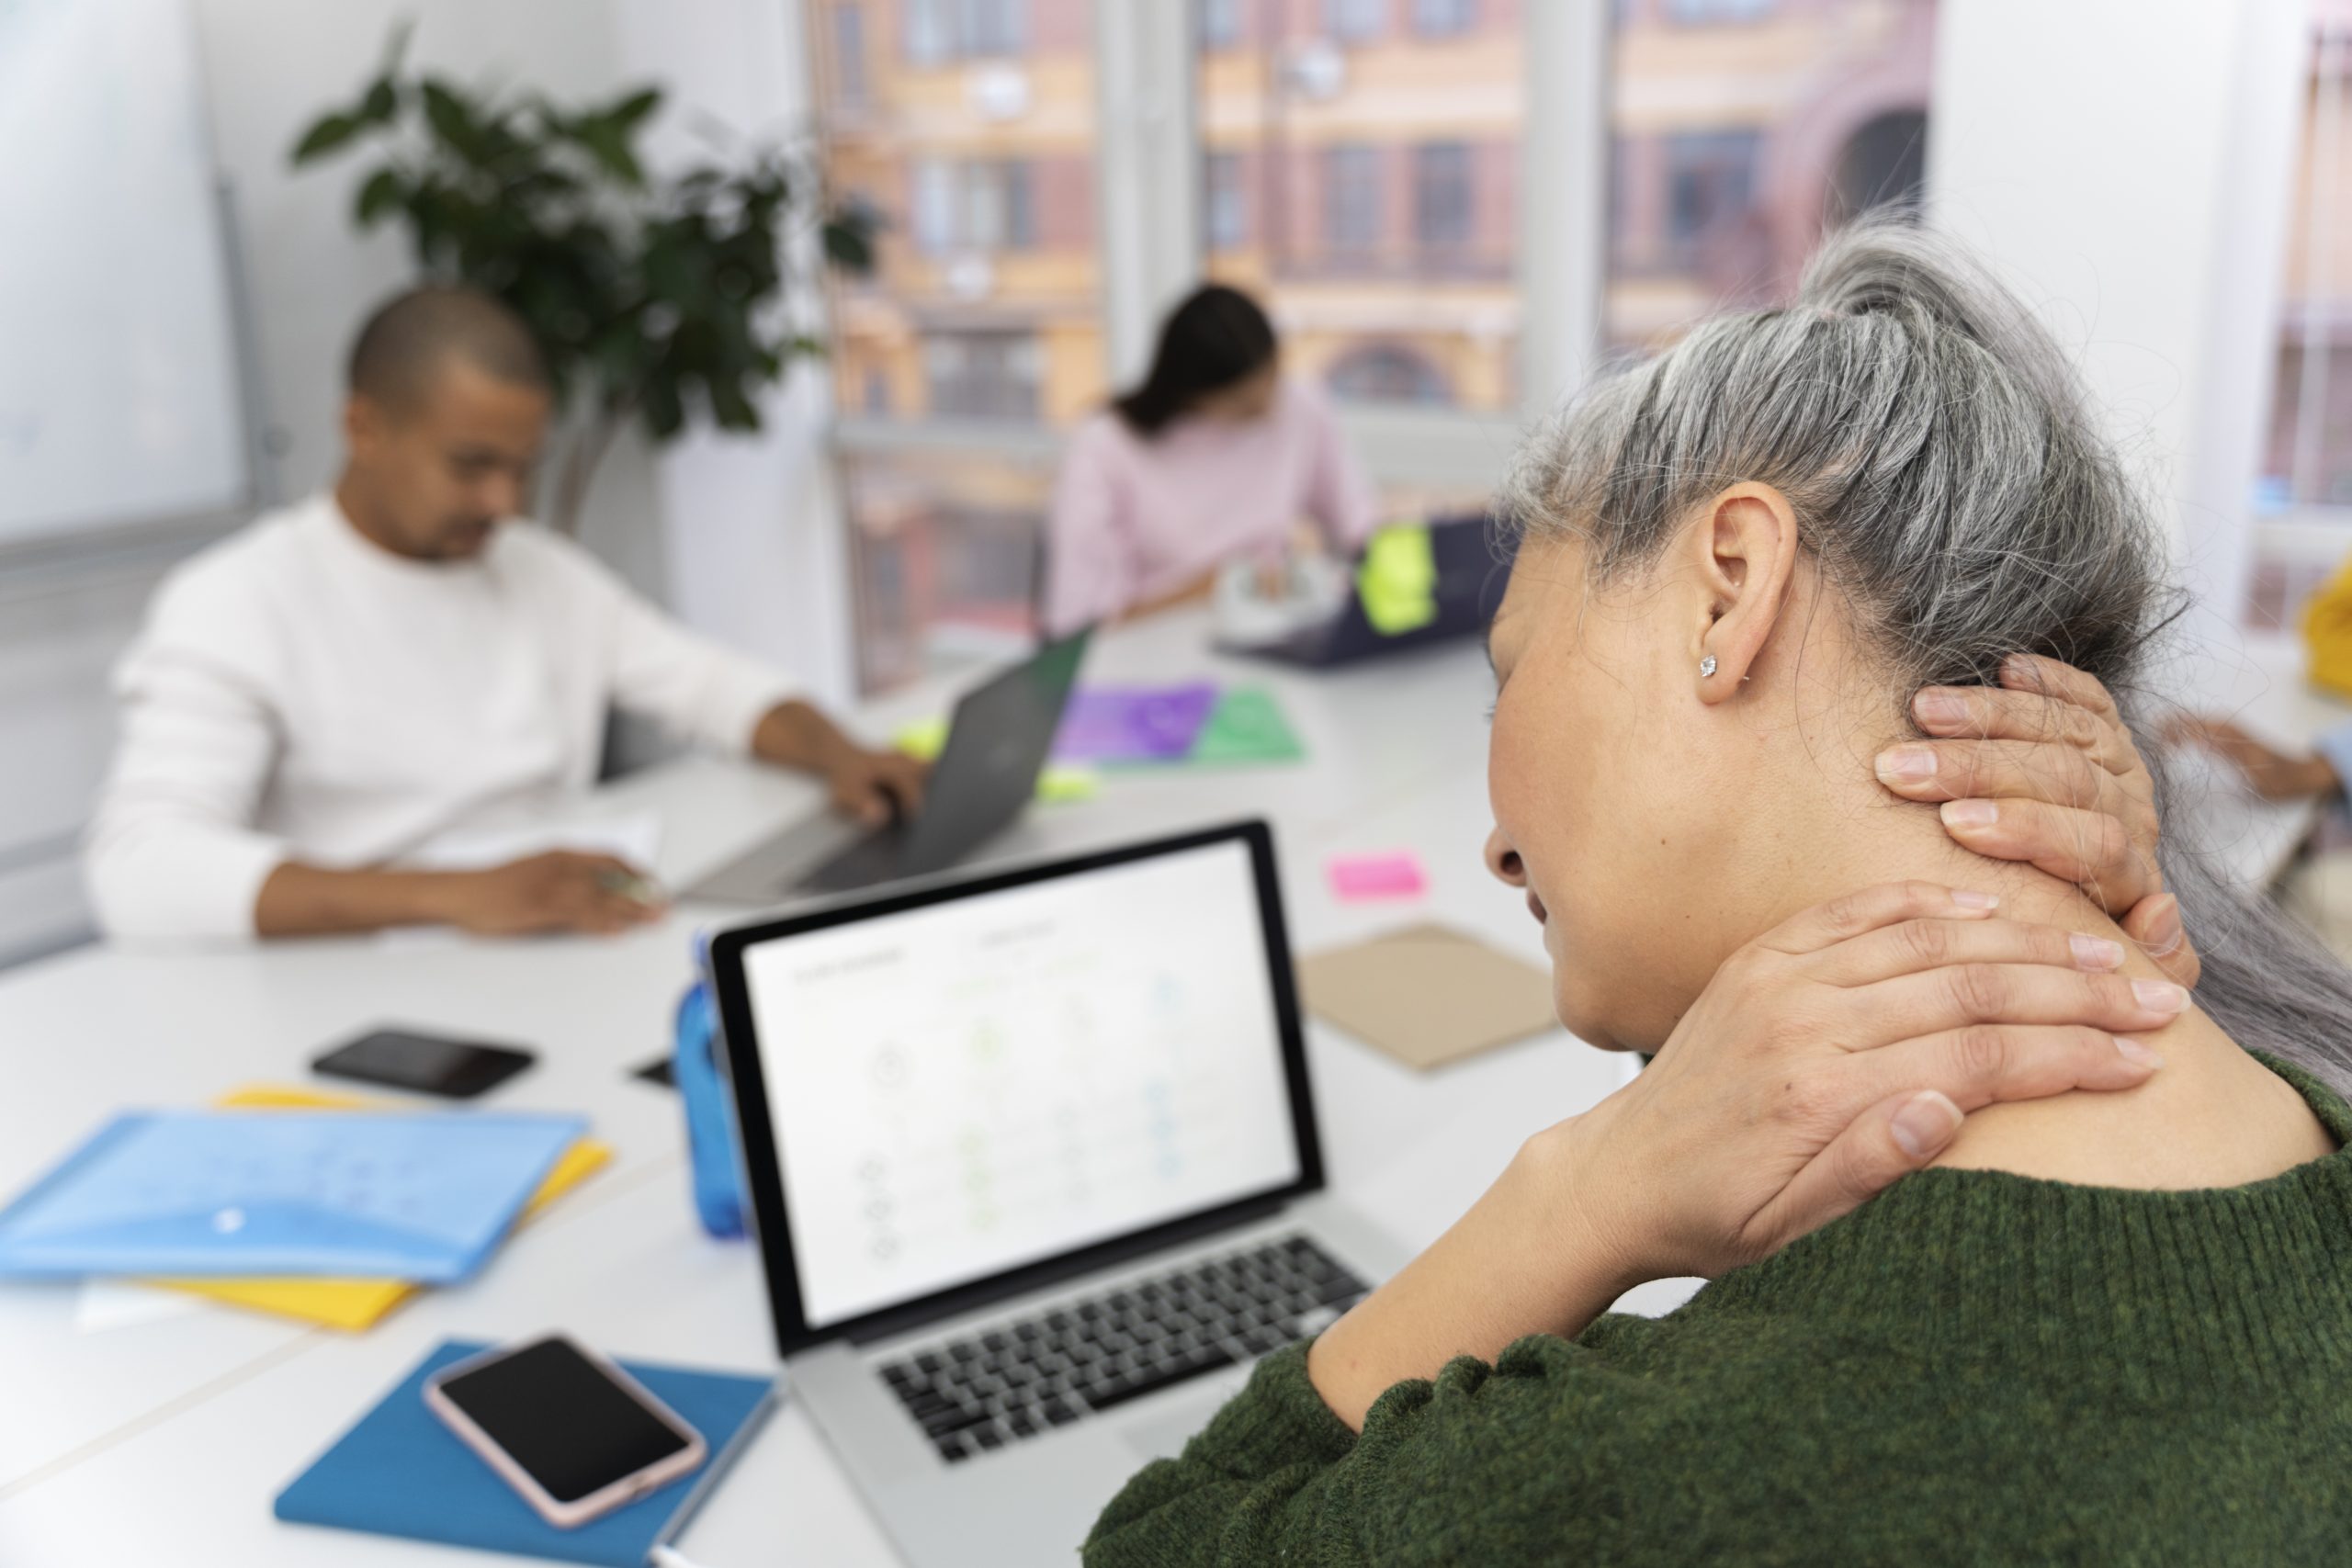 Chiropractic Care in the Digital Age: Easing Tech-Related Aches and Pains